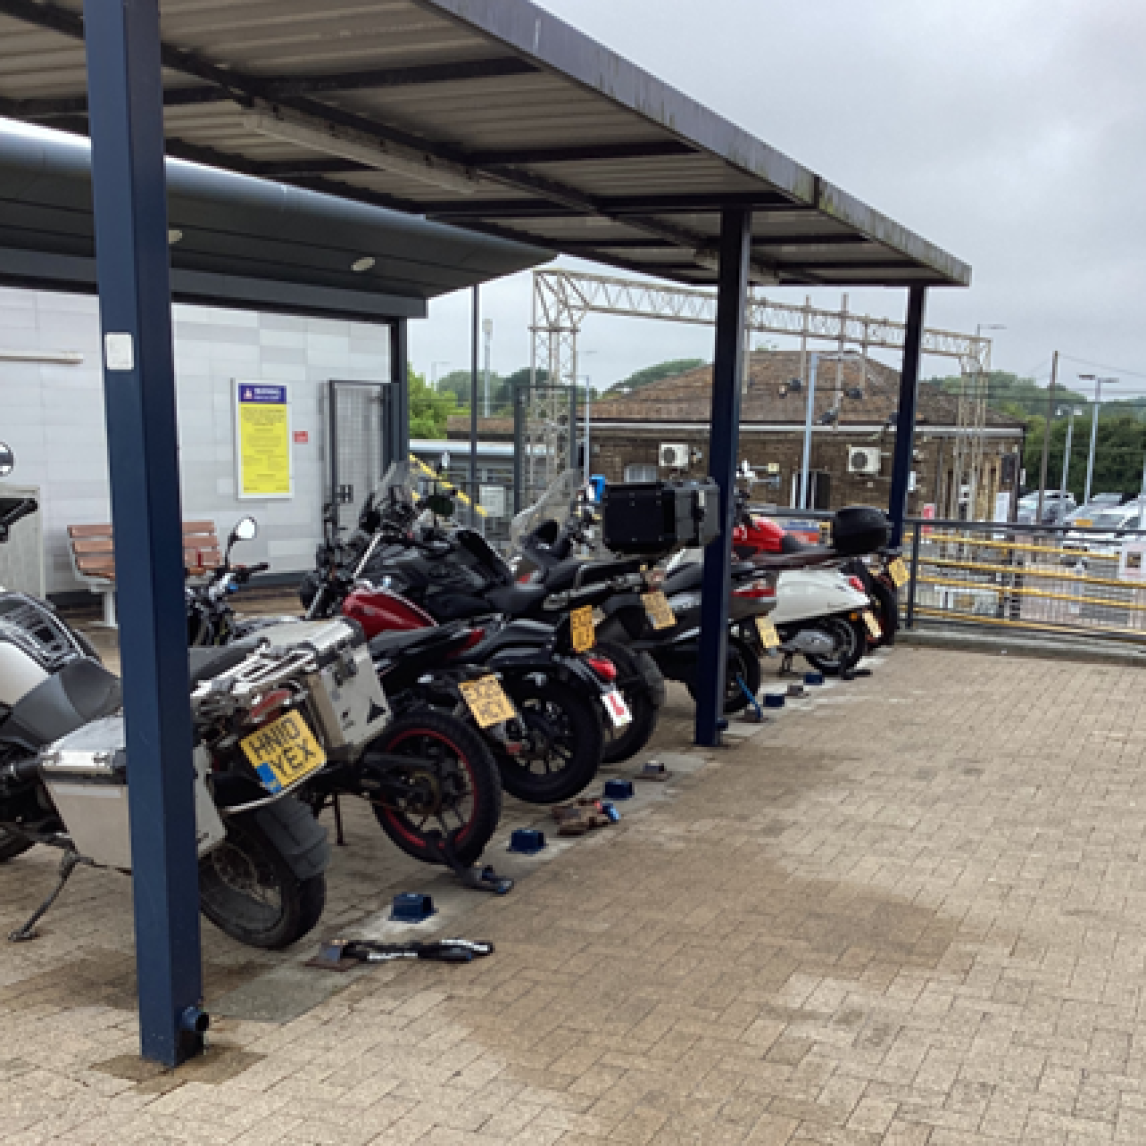 Motorcycle parking at Marks Tey station